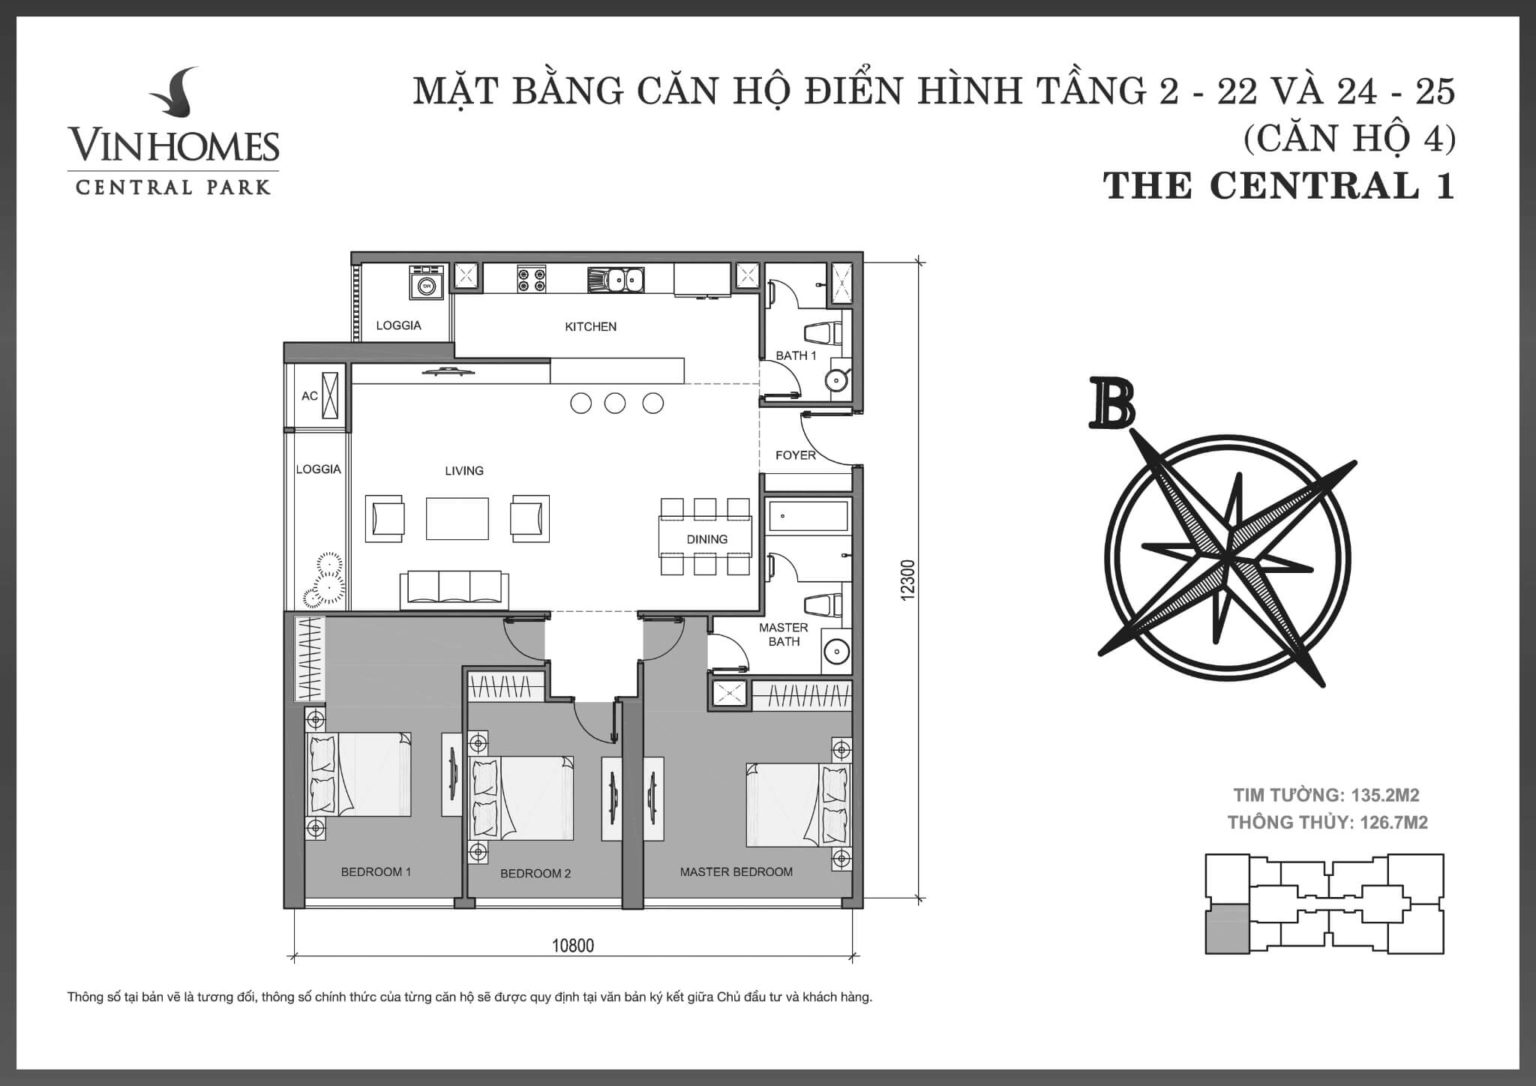 202301/01/08/192501-layout-central-c1-04-tang-02-25-1536x1086.jpg